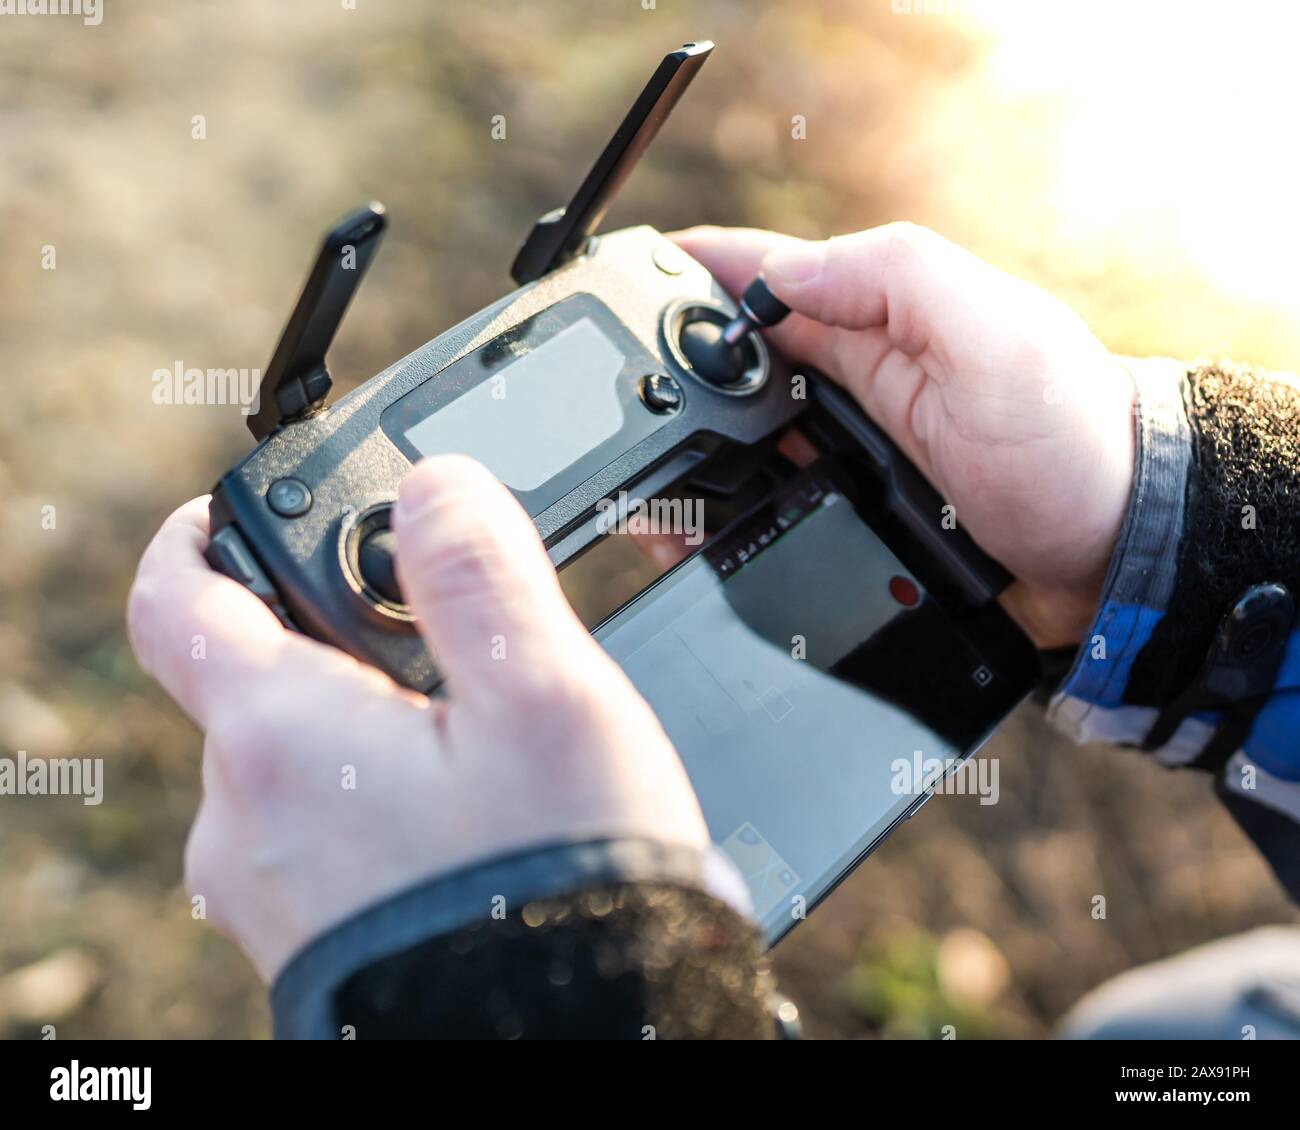 Man operating drone / man holding remote control drones / drone controller. Stock Photo